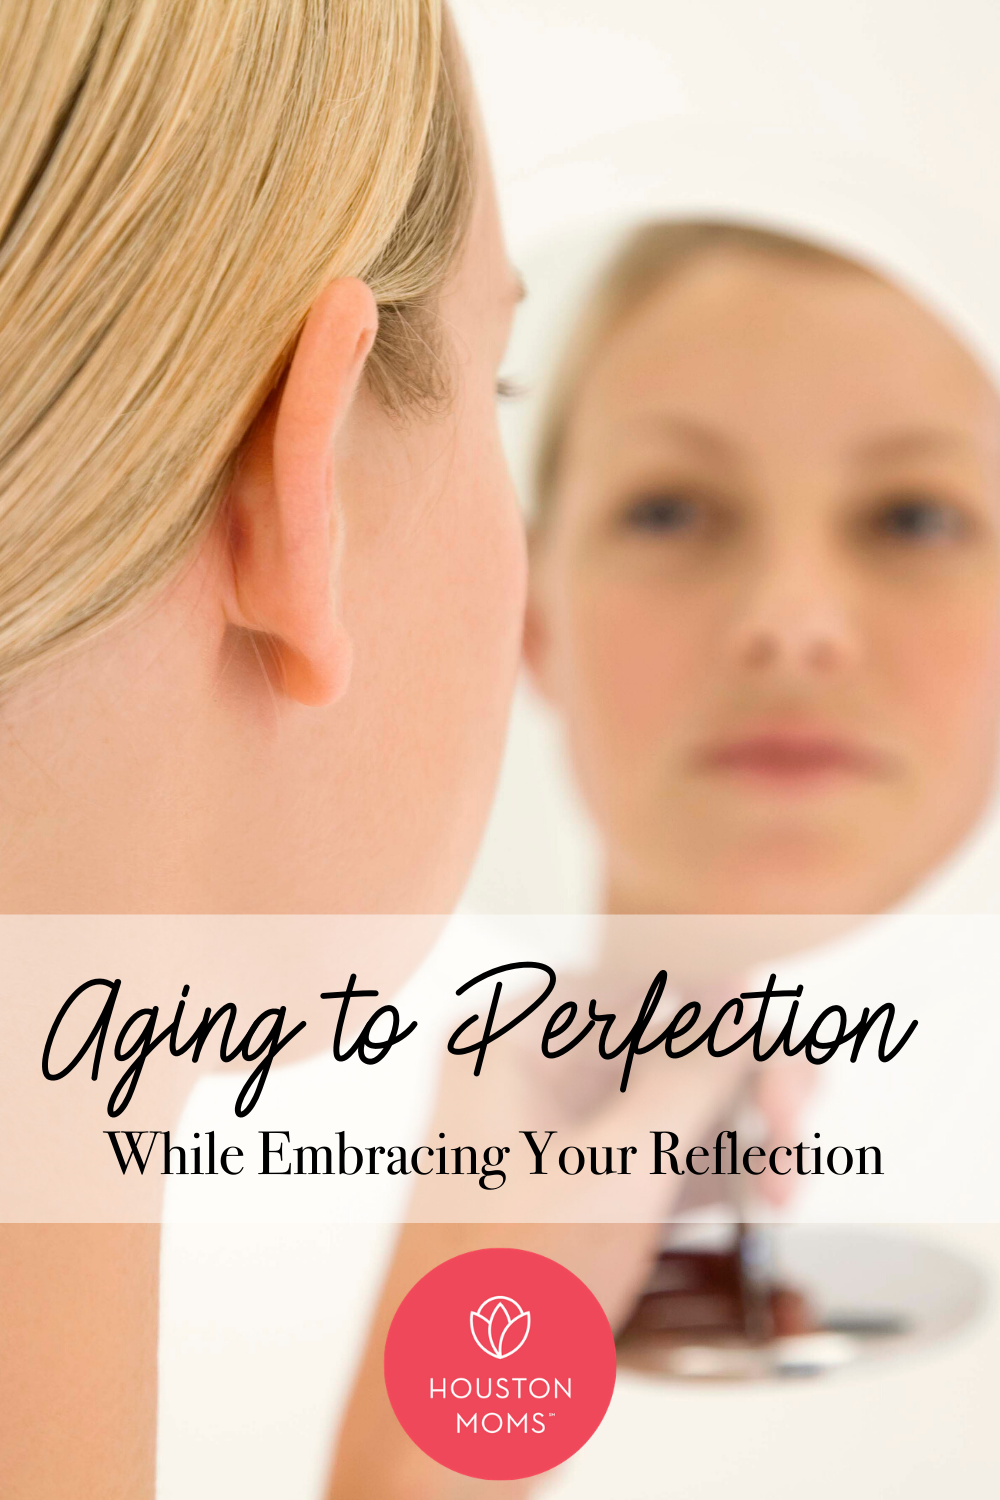 Houston Moms | "Aging to Perfection:: While Embracing Your Reflection" #houstonmomsblog #houstonmoms #momsaroundhouston